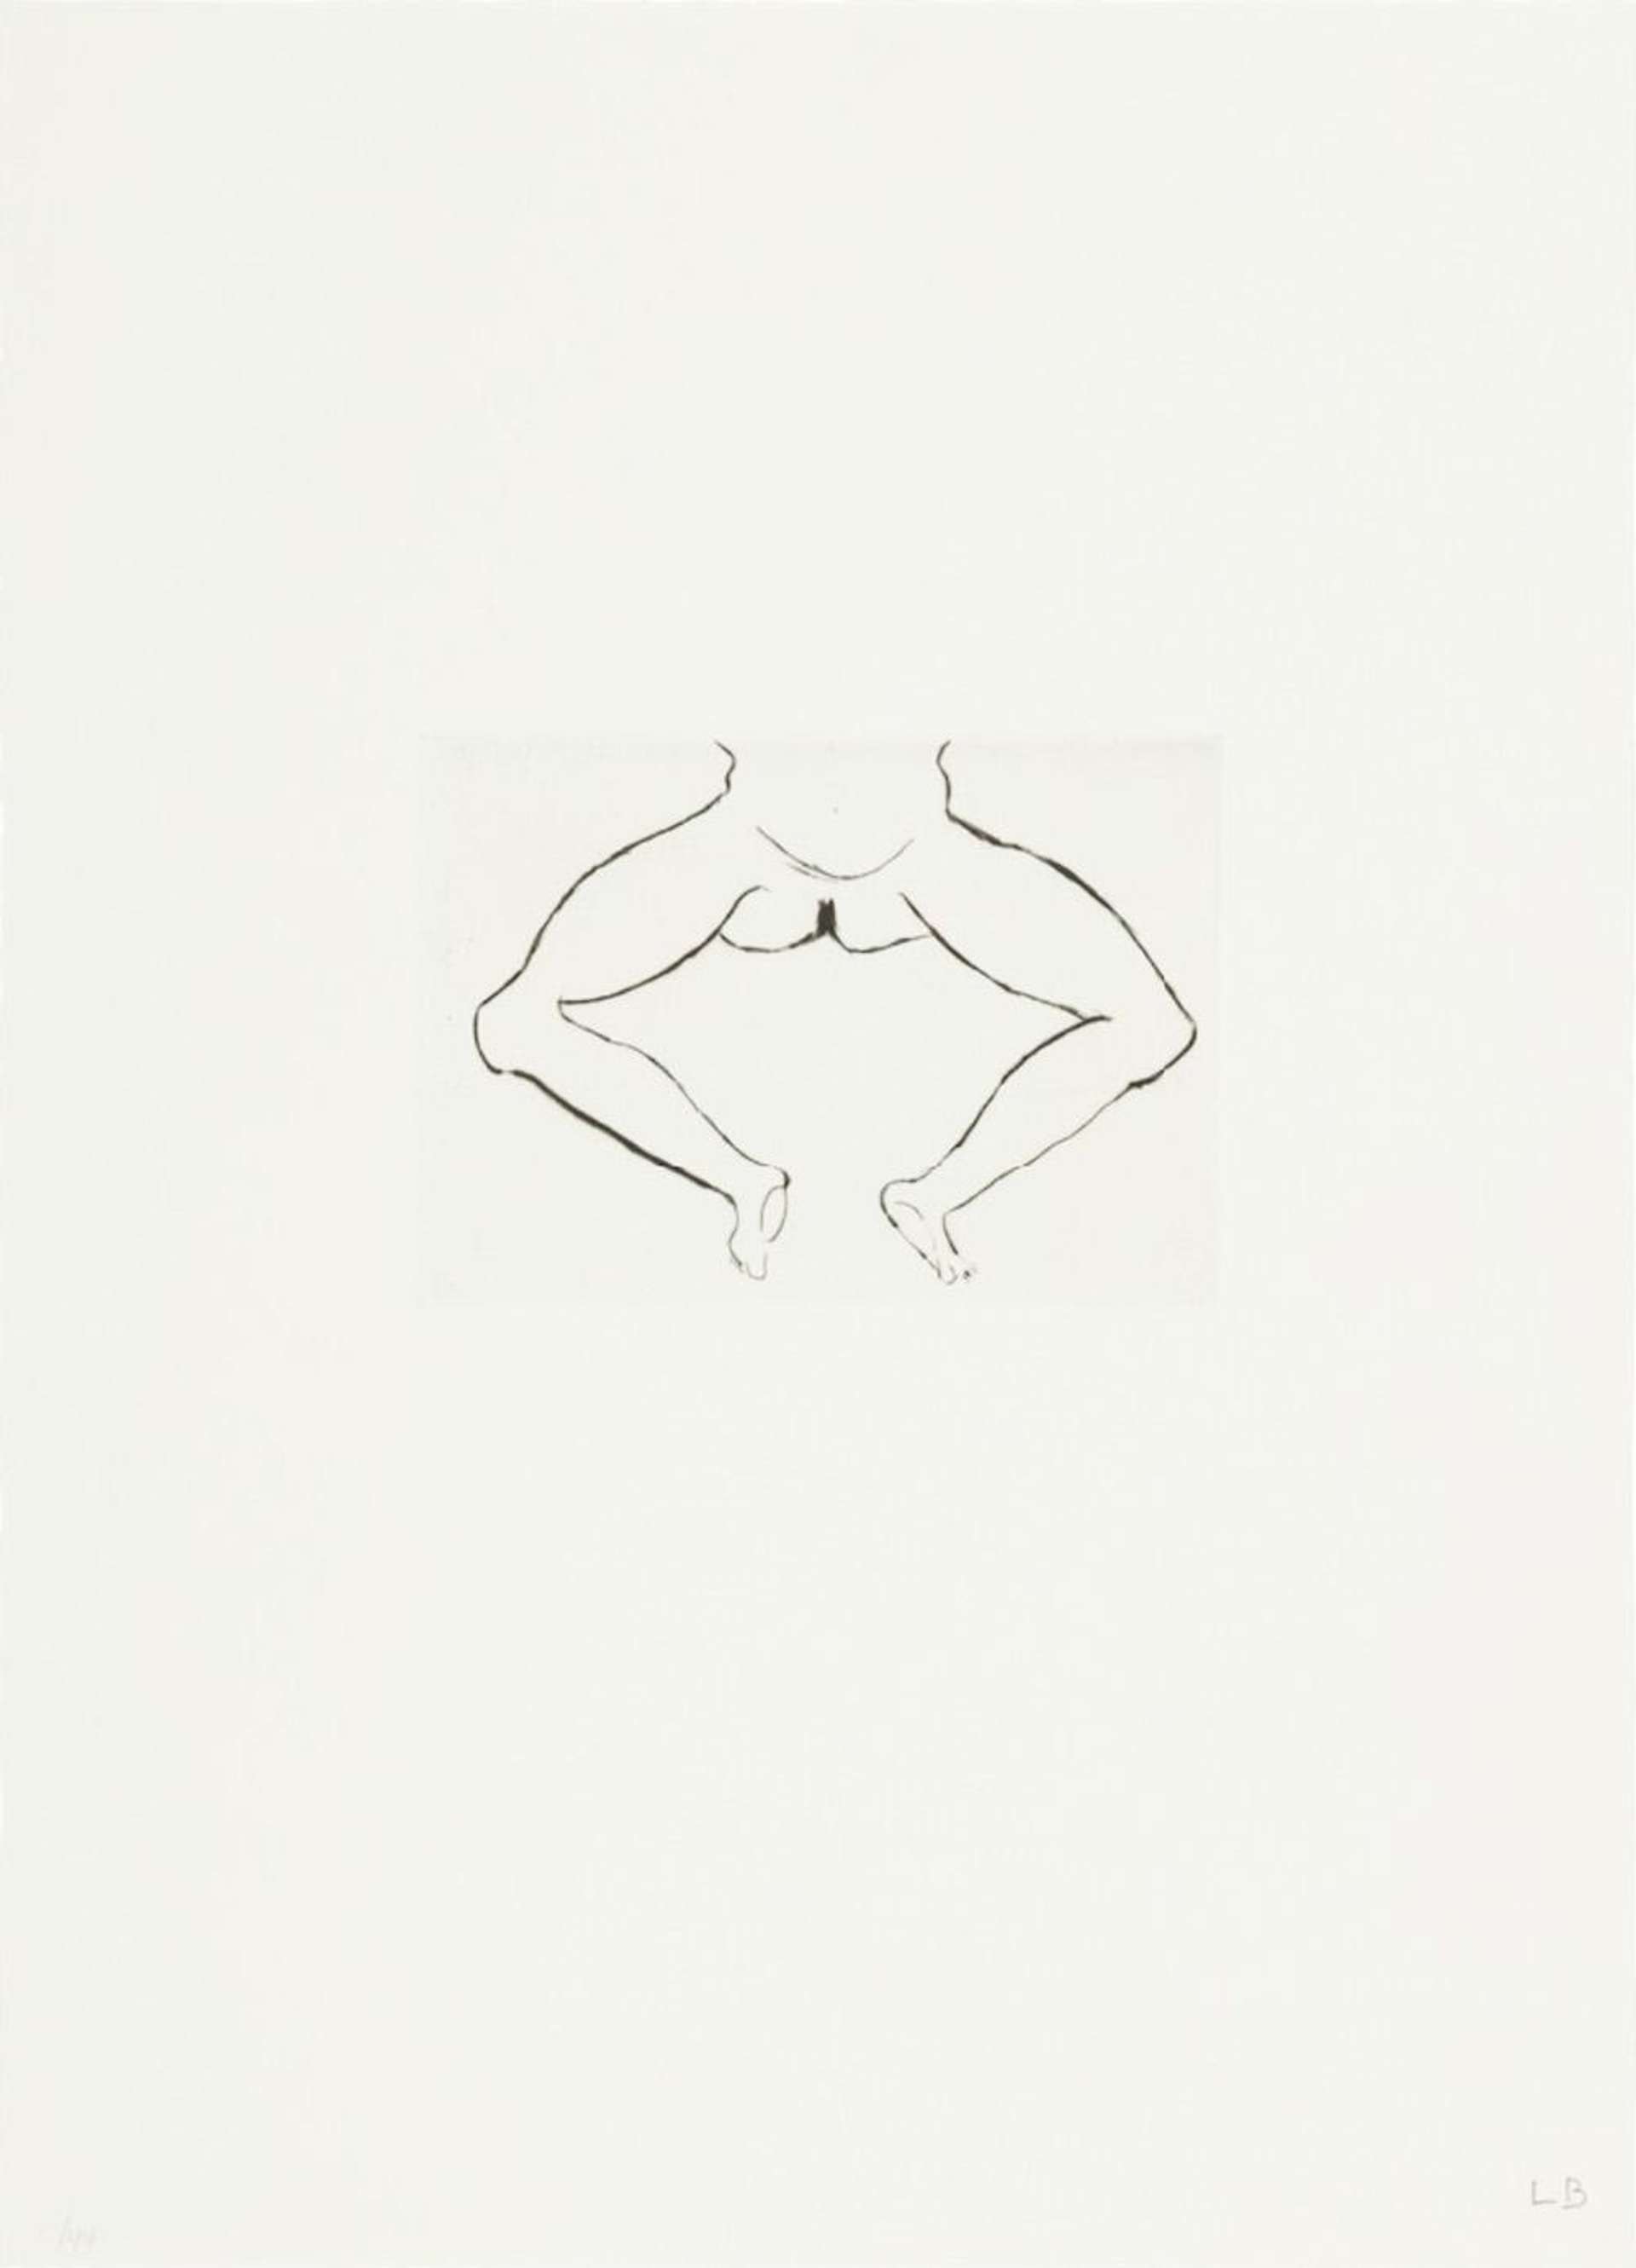  Louise Bourgeois Untitled No. 7. A monochromatic etching of a depiction of the nude lower half of a woman’s body.